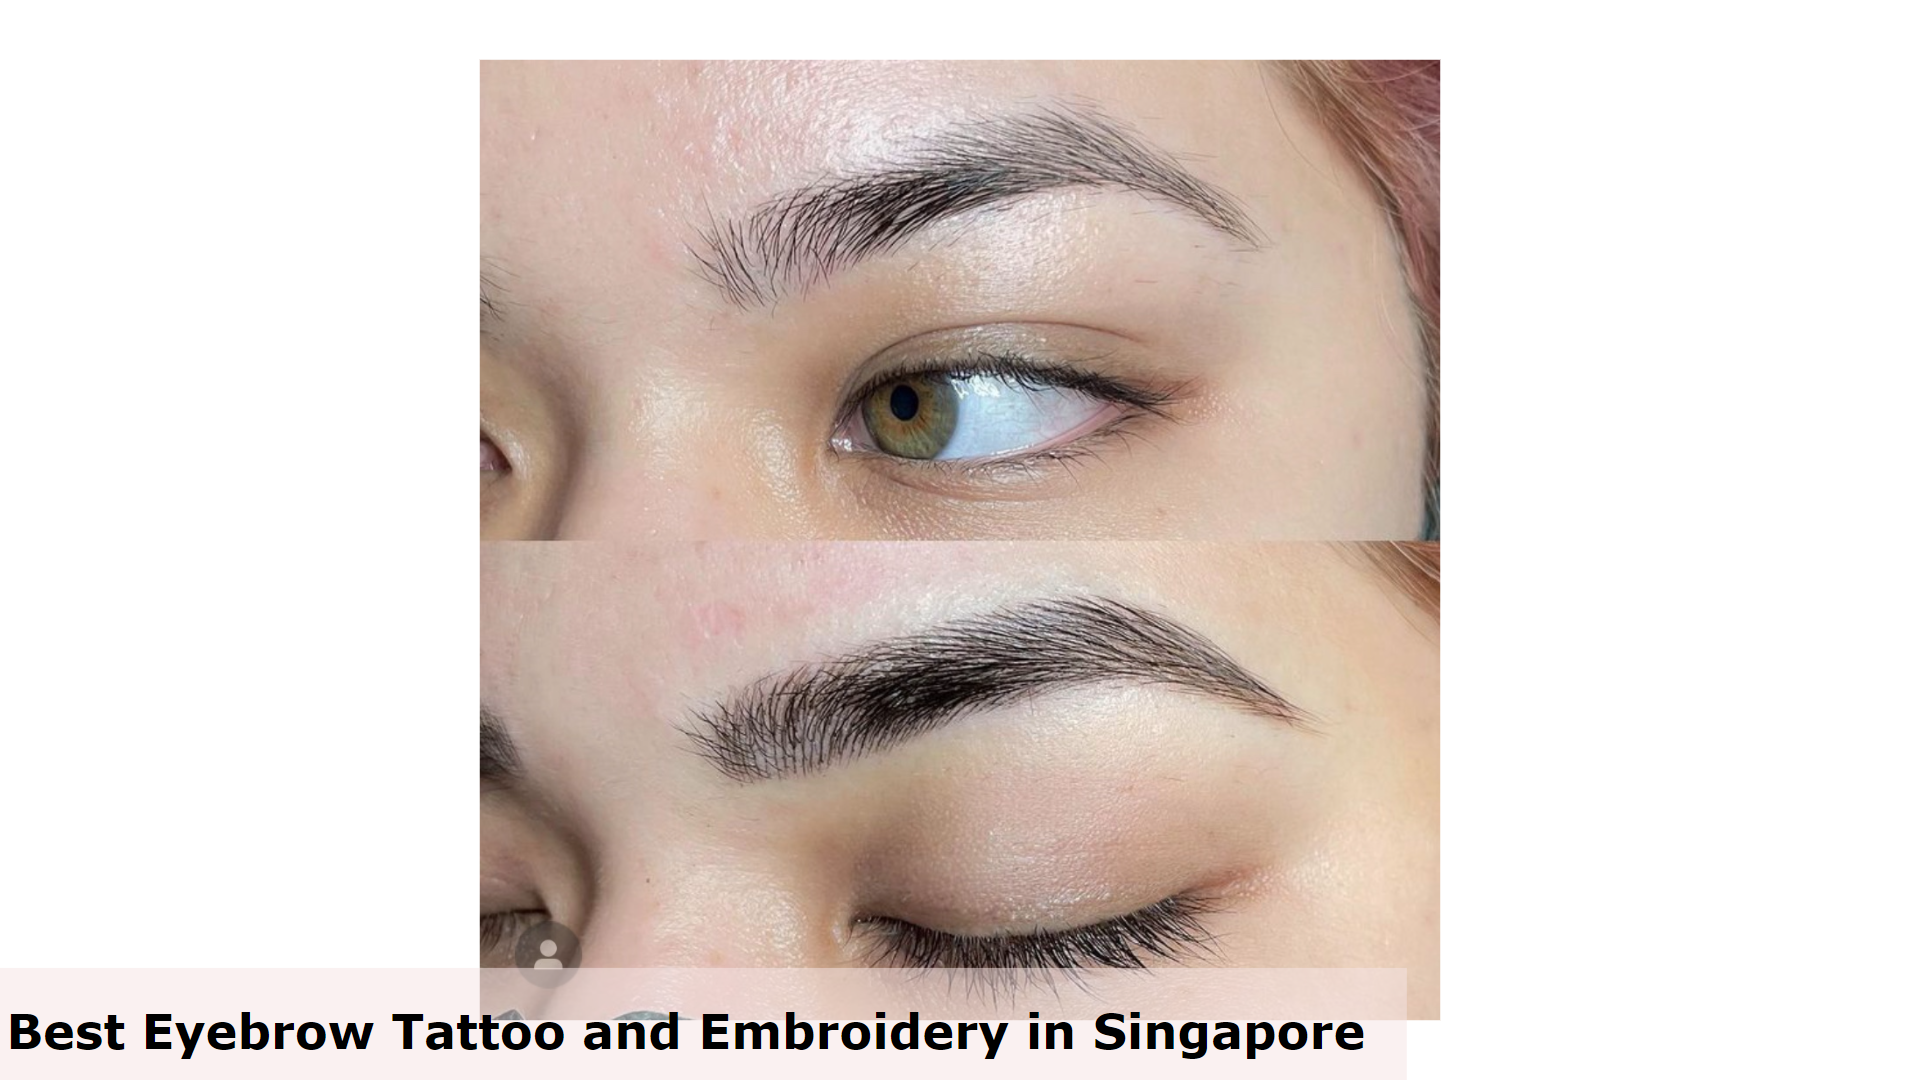 Browhaus - Best Eyebrow Tattoo and Embroidery in Singapore, Eyebrow Tattoo and Embroidery Singapore, Are eyebrow tattoos embroidery?, best eyebrow embroidery salons in Singapore, Is eyebrow embroidery the same as microblading?, How long will your eyebrow embroidery last?, What is the difference between Eyebrow Tattoo & Eyebrow Embroidery?, What is eyebrow embroidery Singapore?, How long does it take for eyebrow embroidery to heal?, cheap and good eyebrow embroidery singapore, eyebrow embroidery singapore price, eyebrow microblading singapore, home-based eyebrow embroidery singapore, korean eyebrow embroidery singapore, eyebrow embroidery singapore review, eyebrow tattoo singapore, 